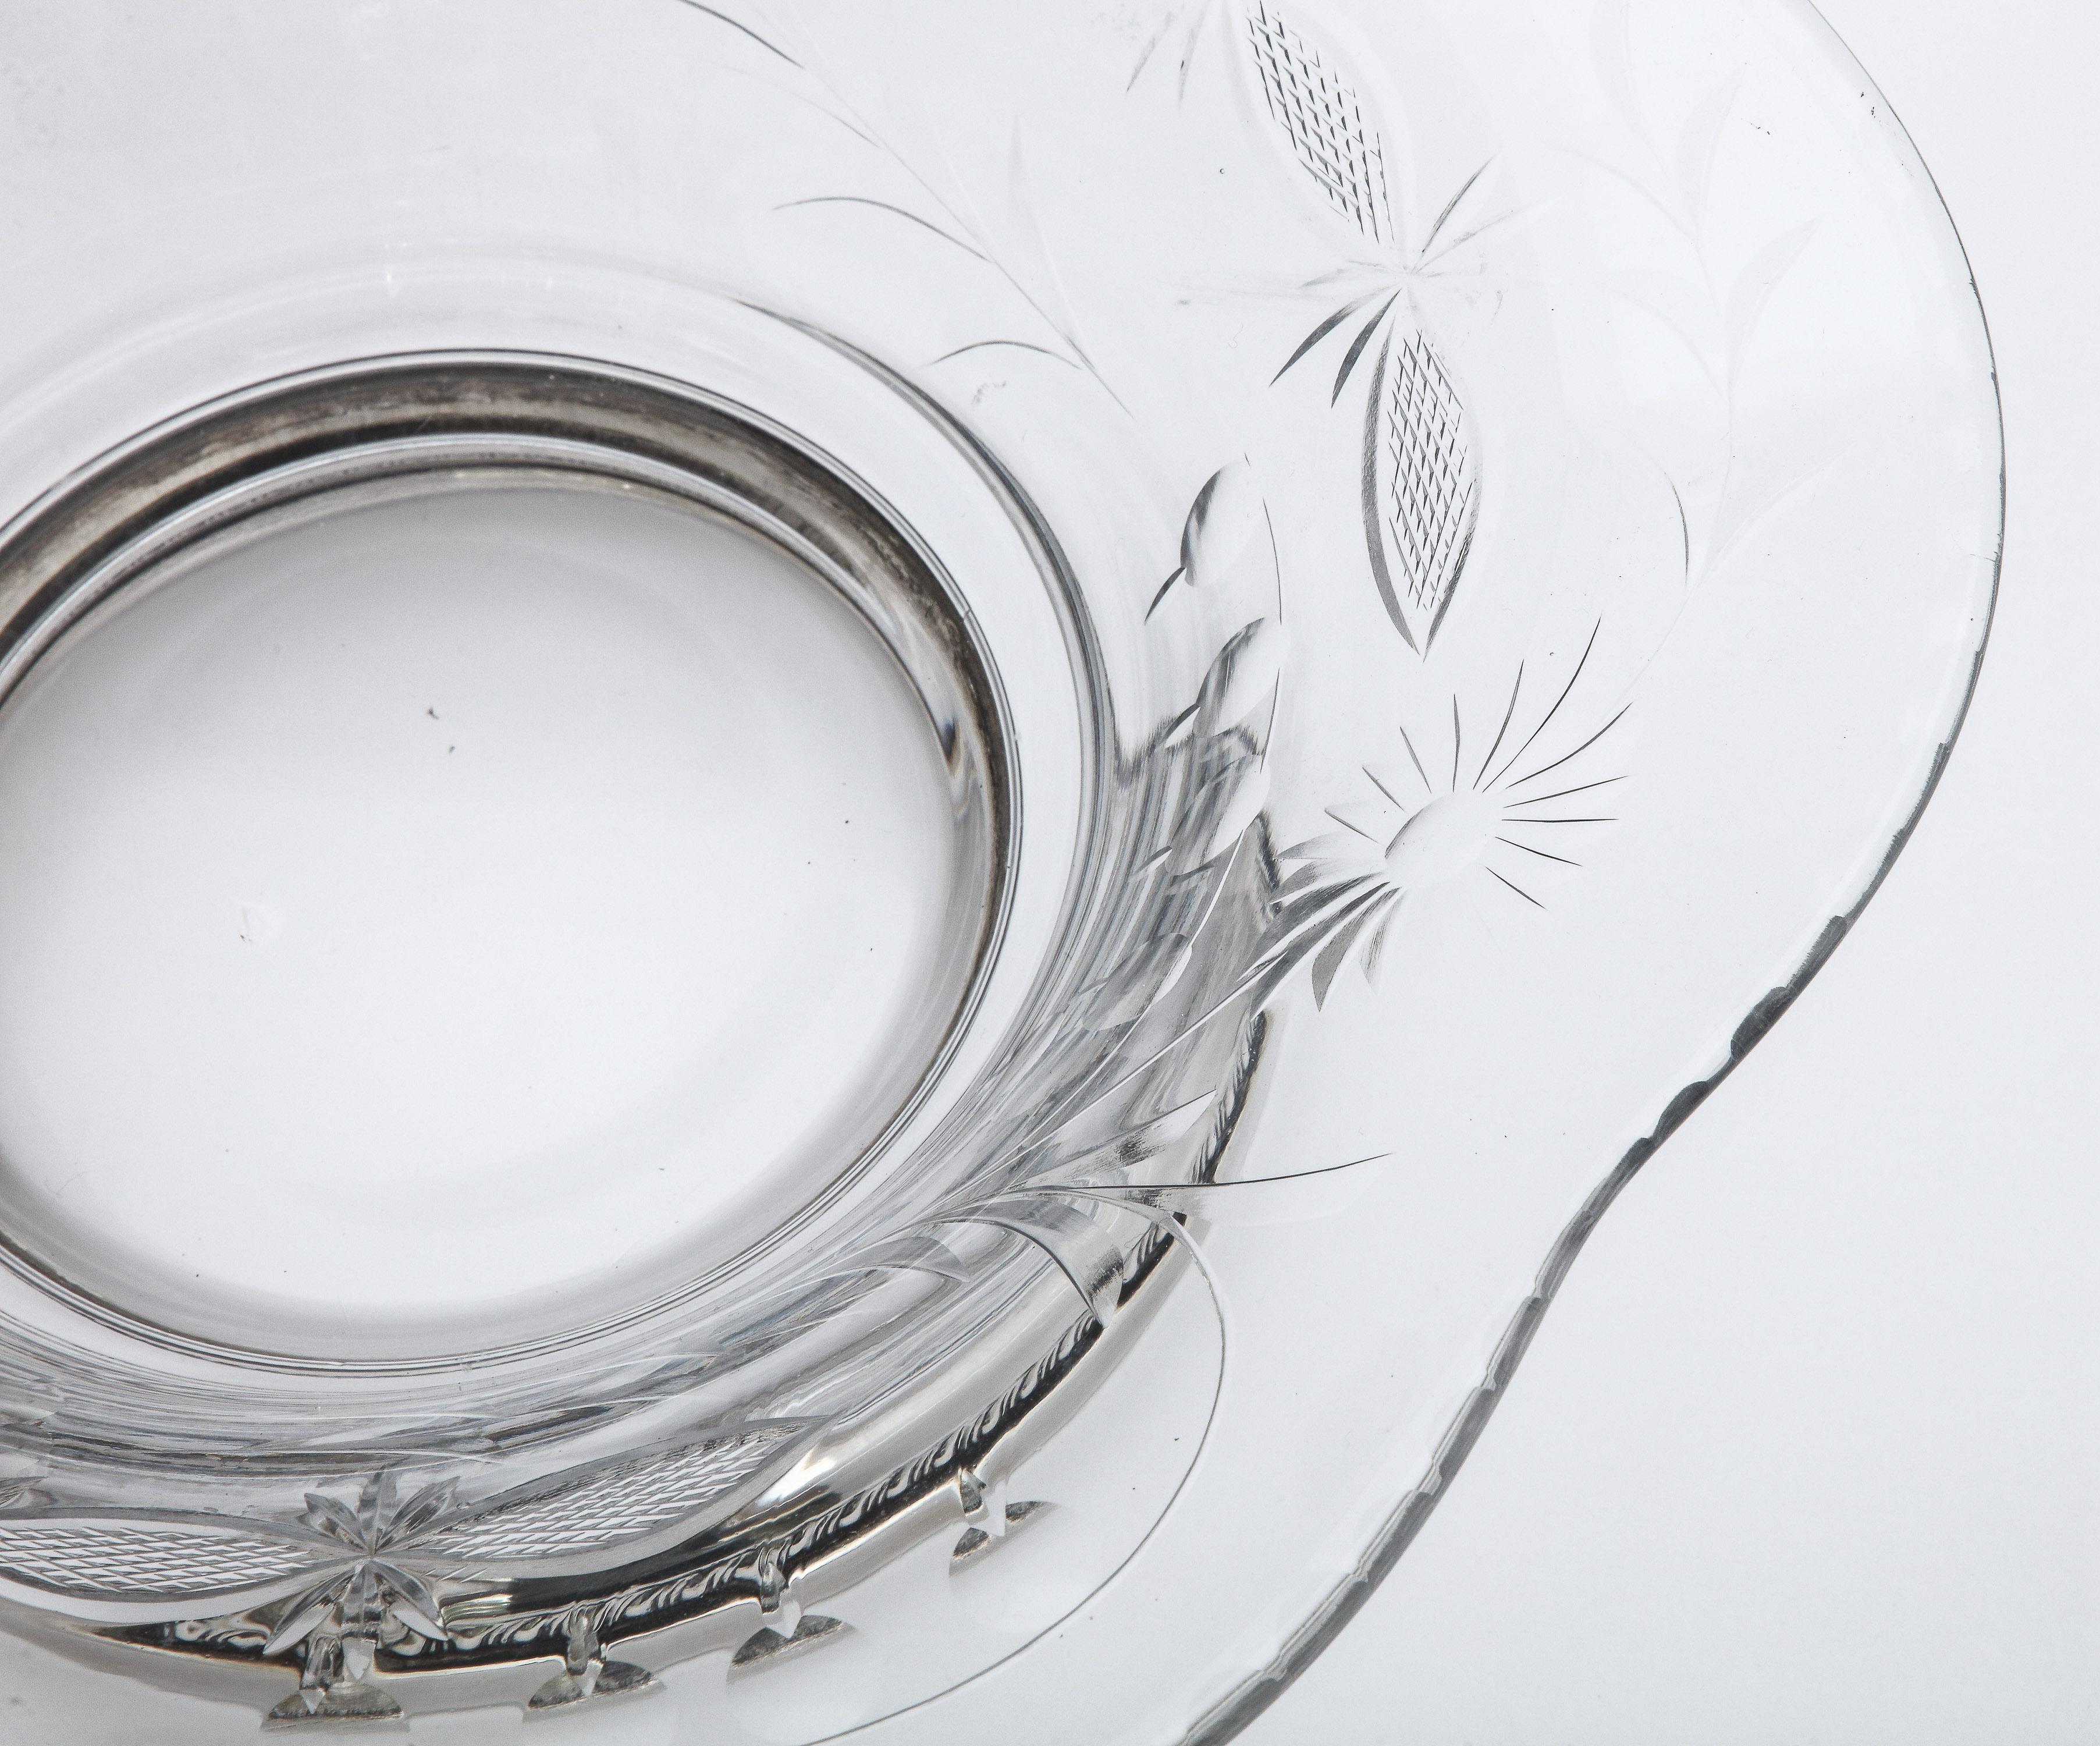 Mid-20th Century Edwardian Style Sterling Silver-Mounted Wheel-Cut Glass Centerpiece Bowl For Sale